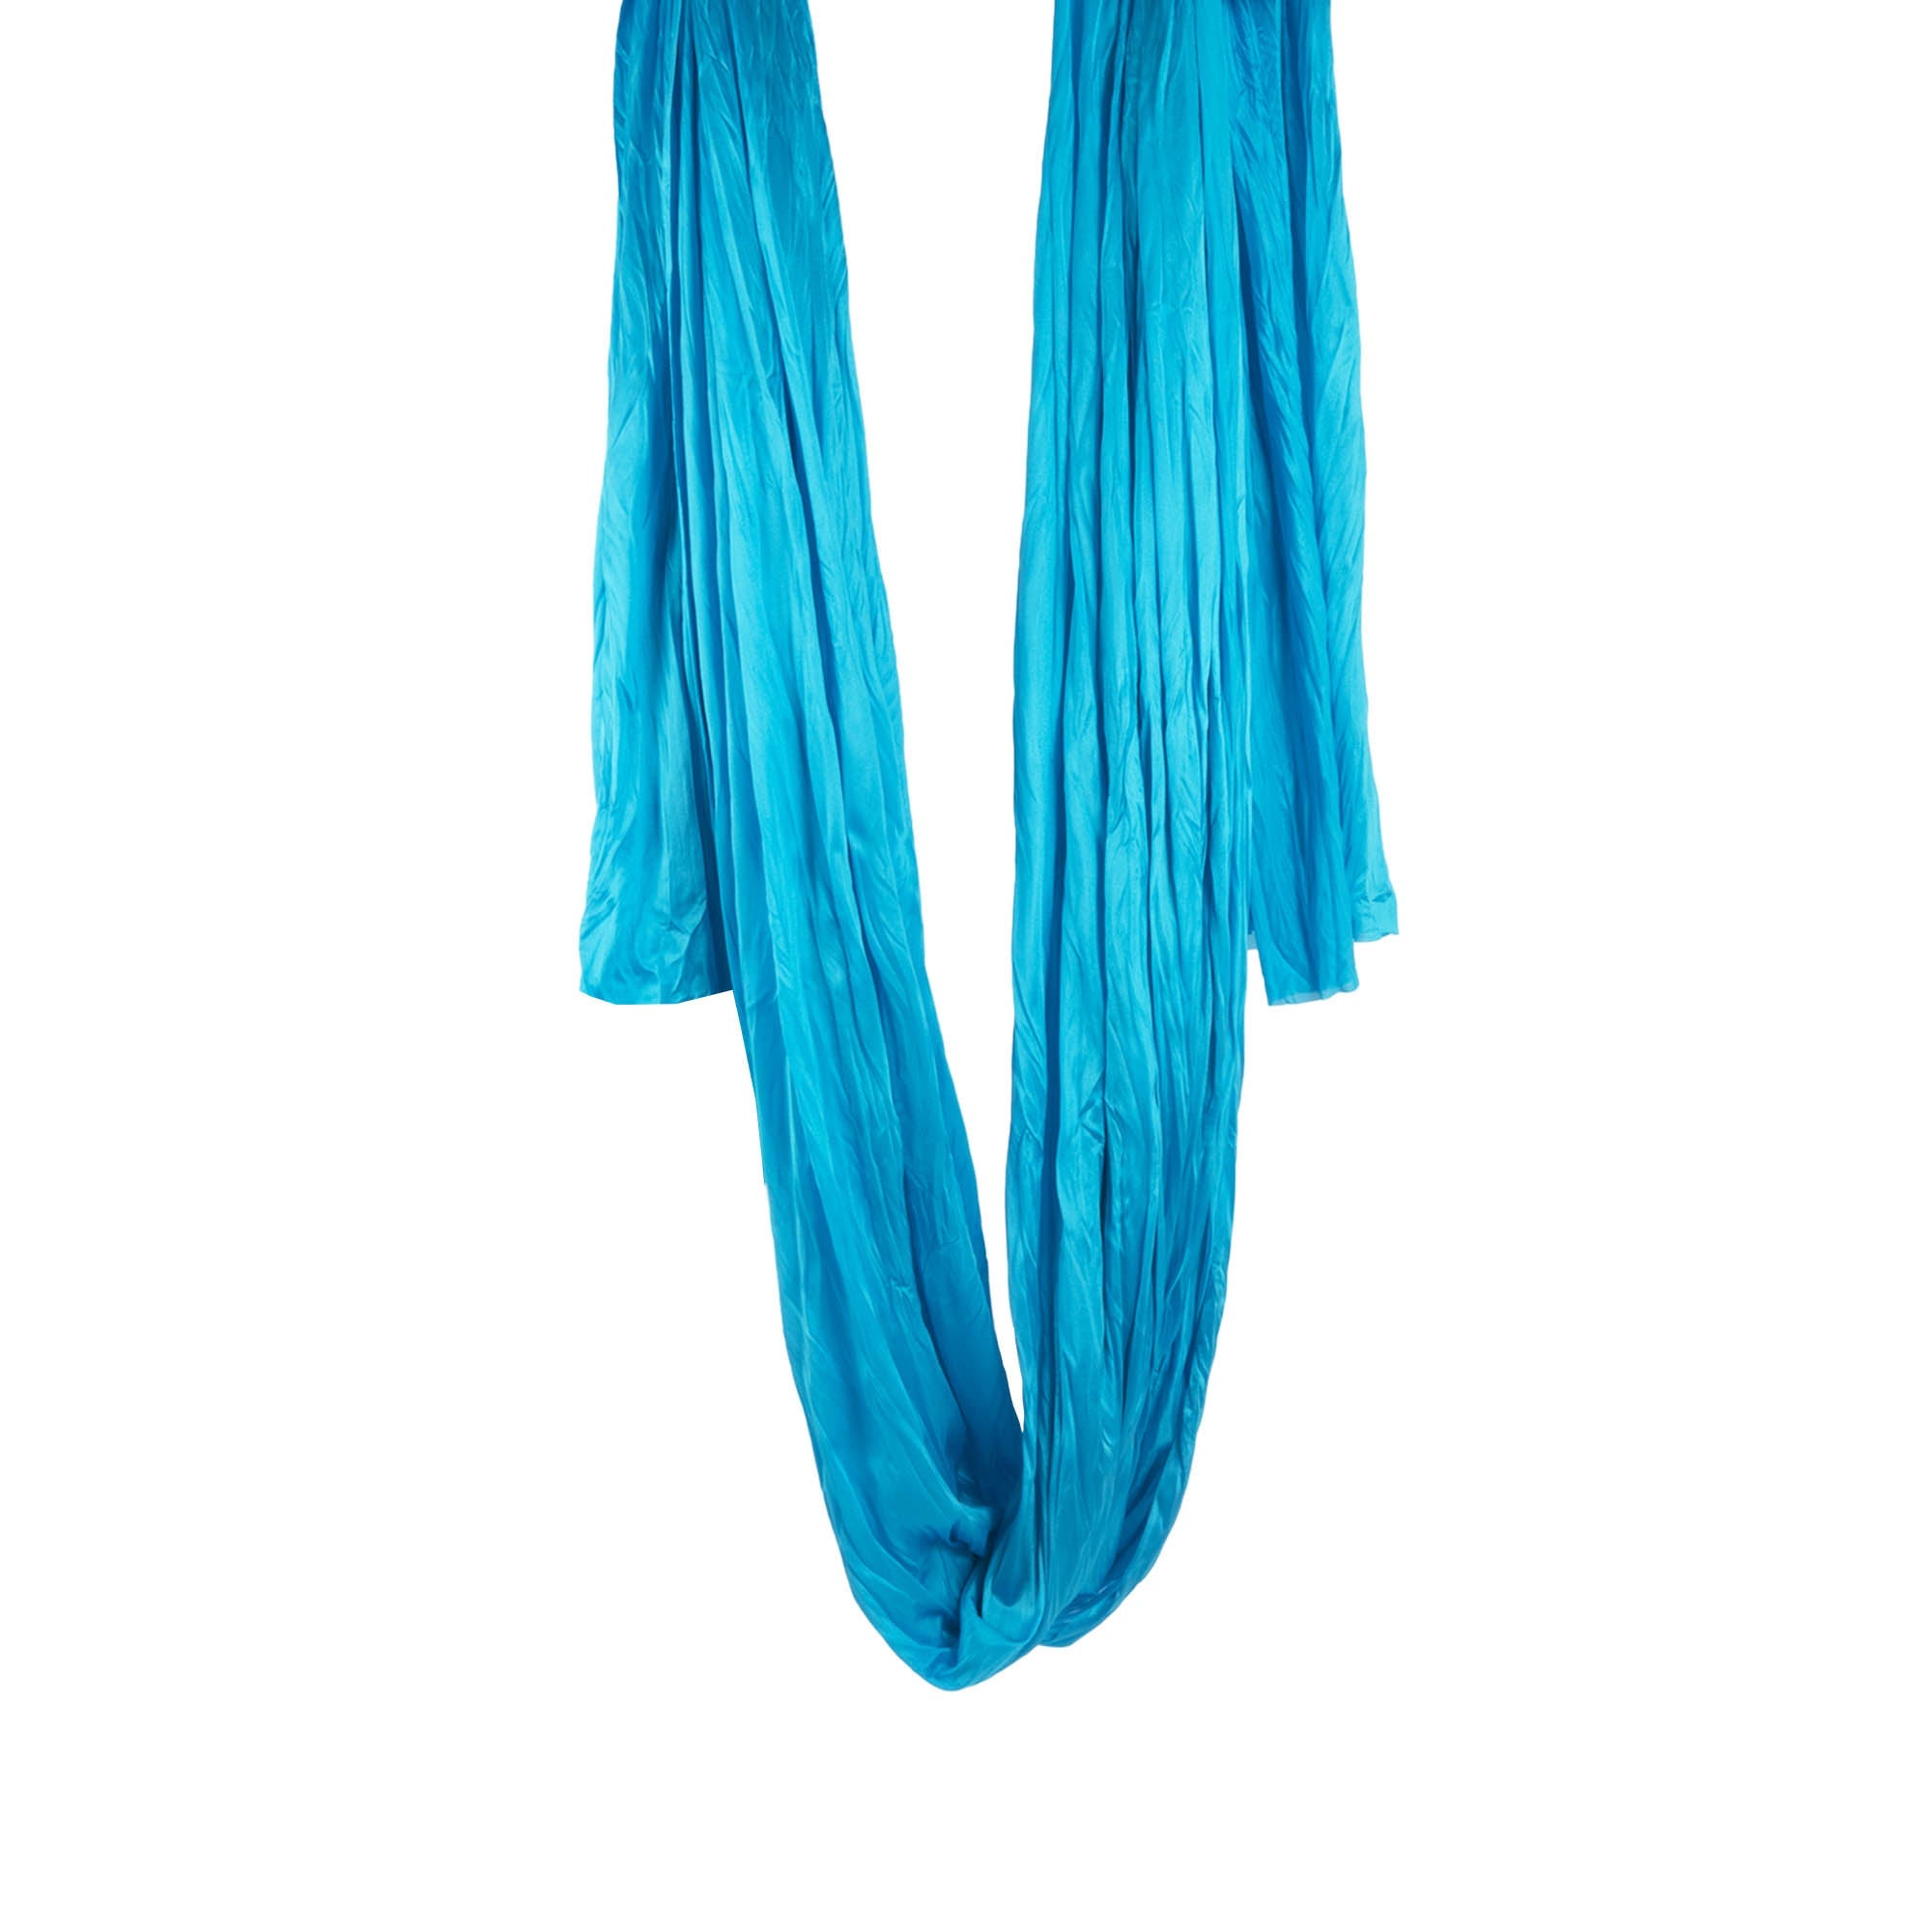 Prodigy 6m aerial yoga hammock in turquoise hanging